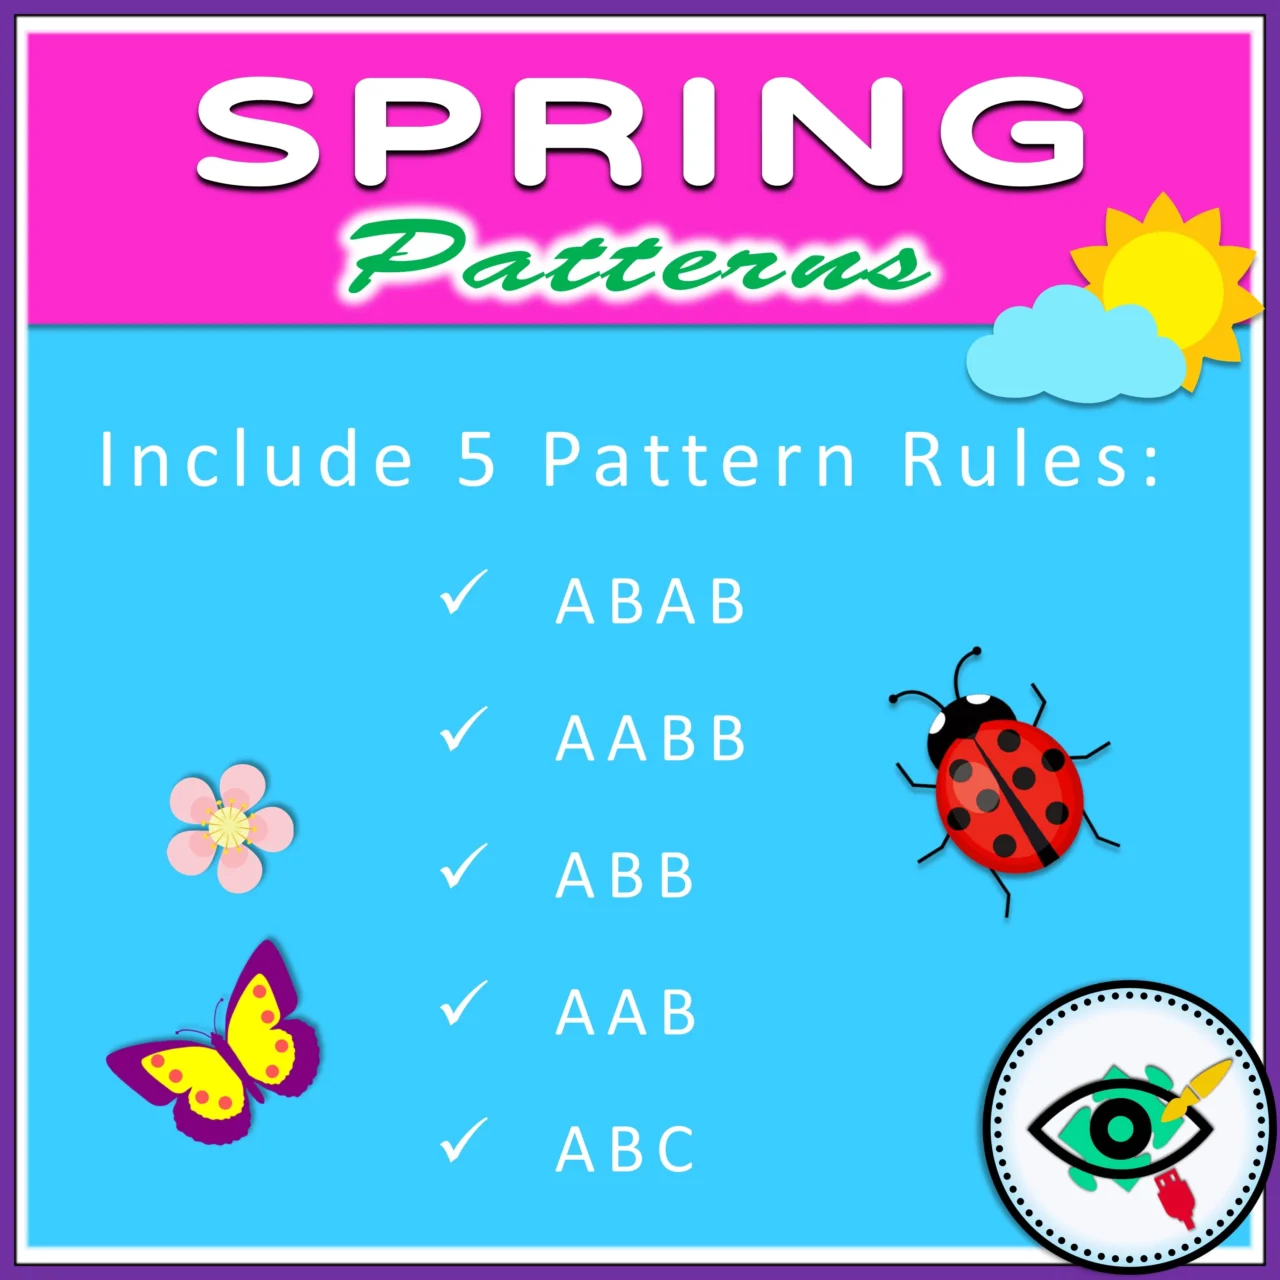 Spring - Patterns Activity - Image Title 1